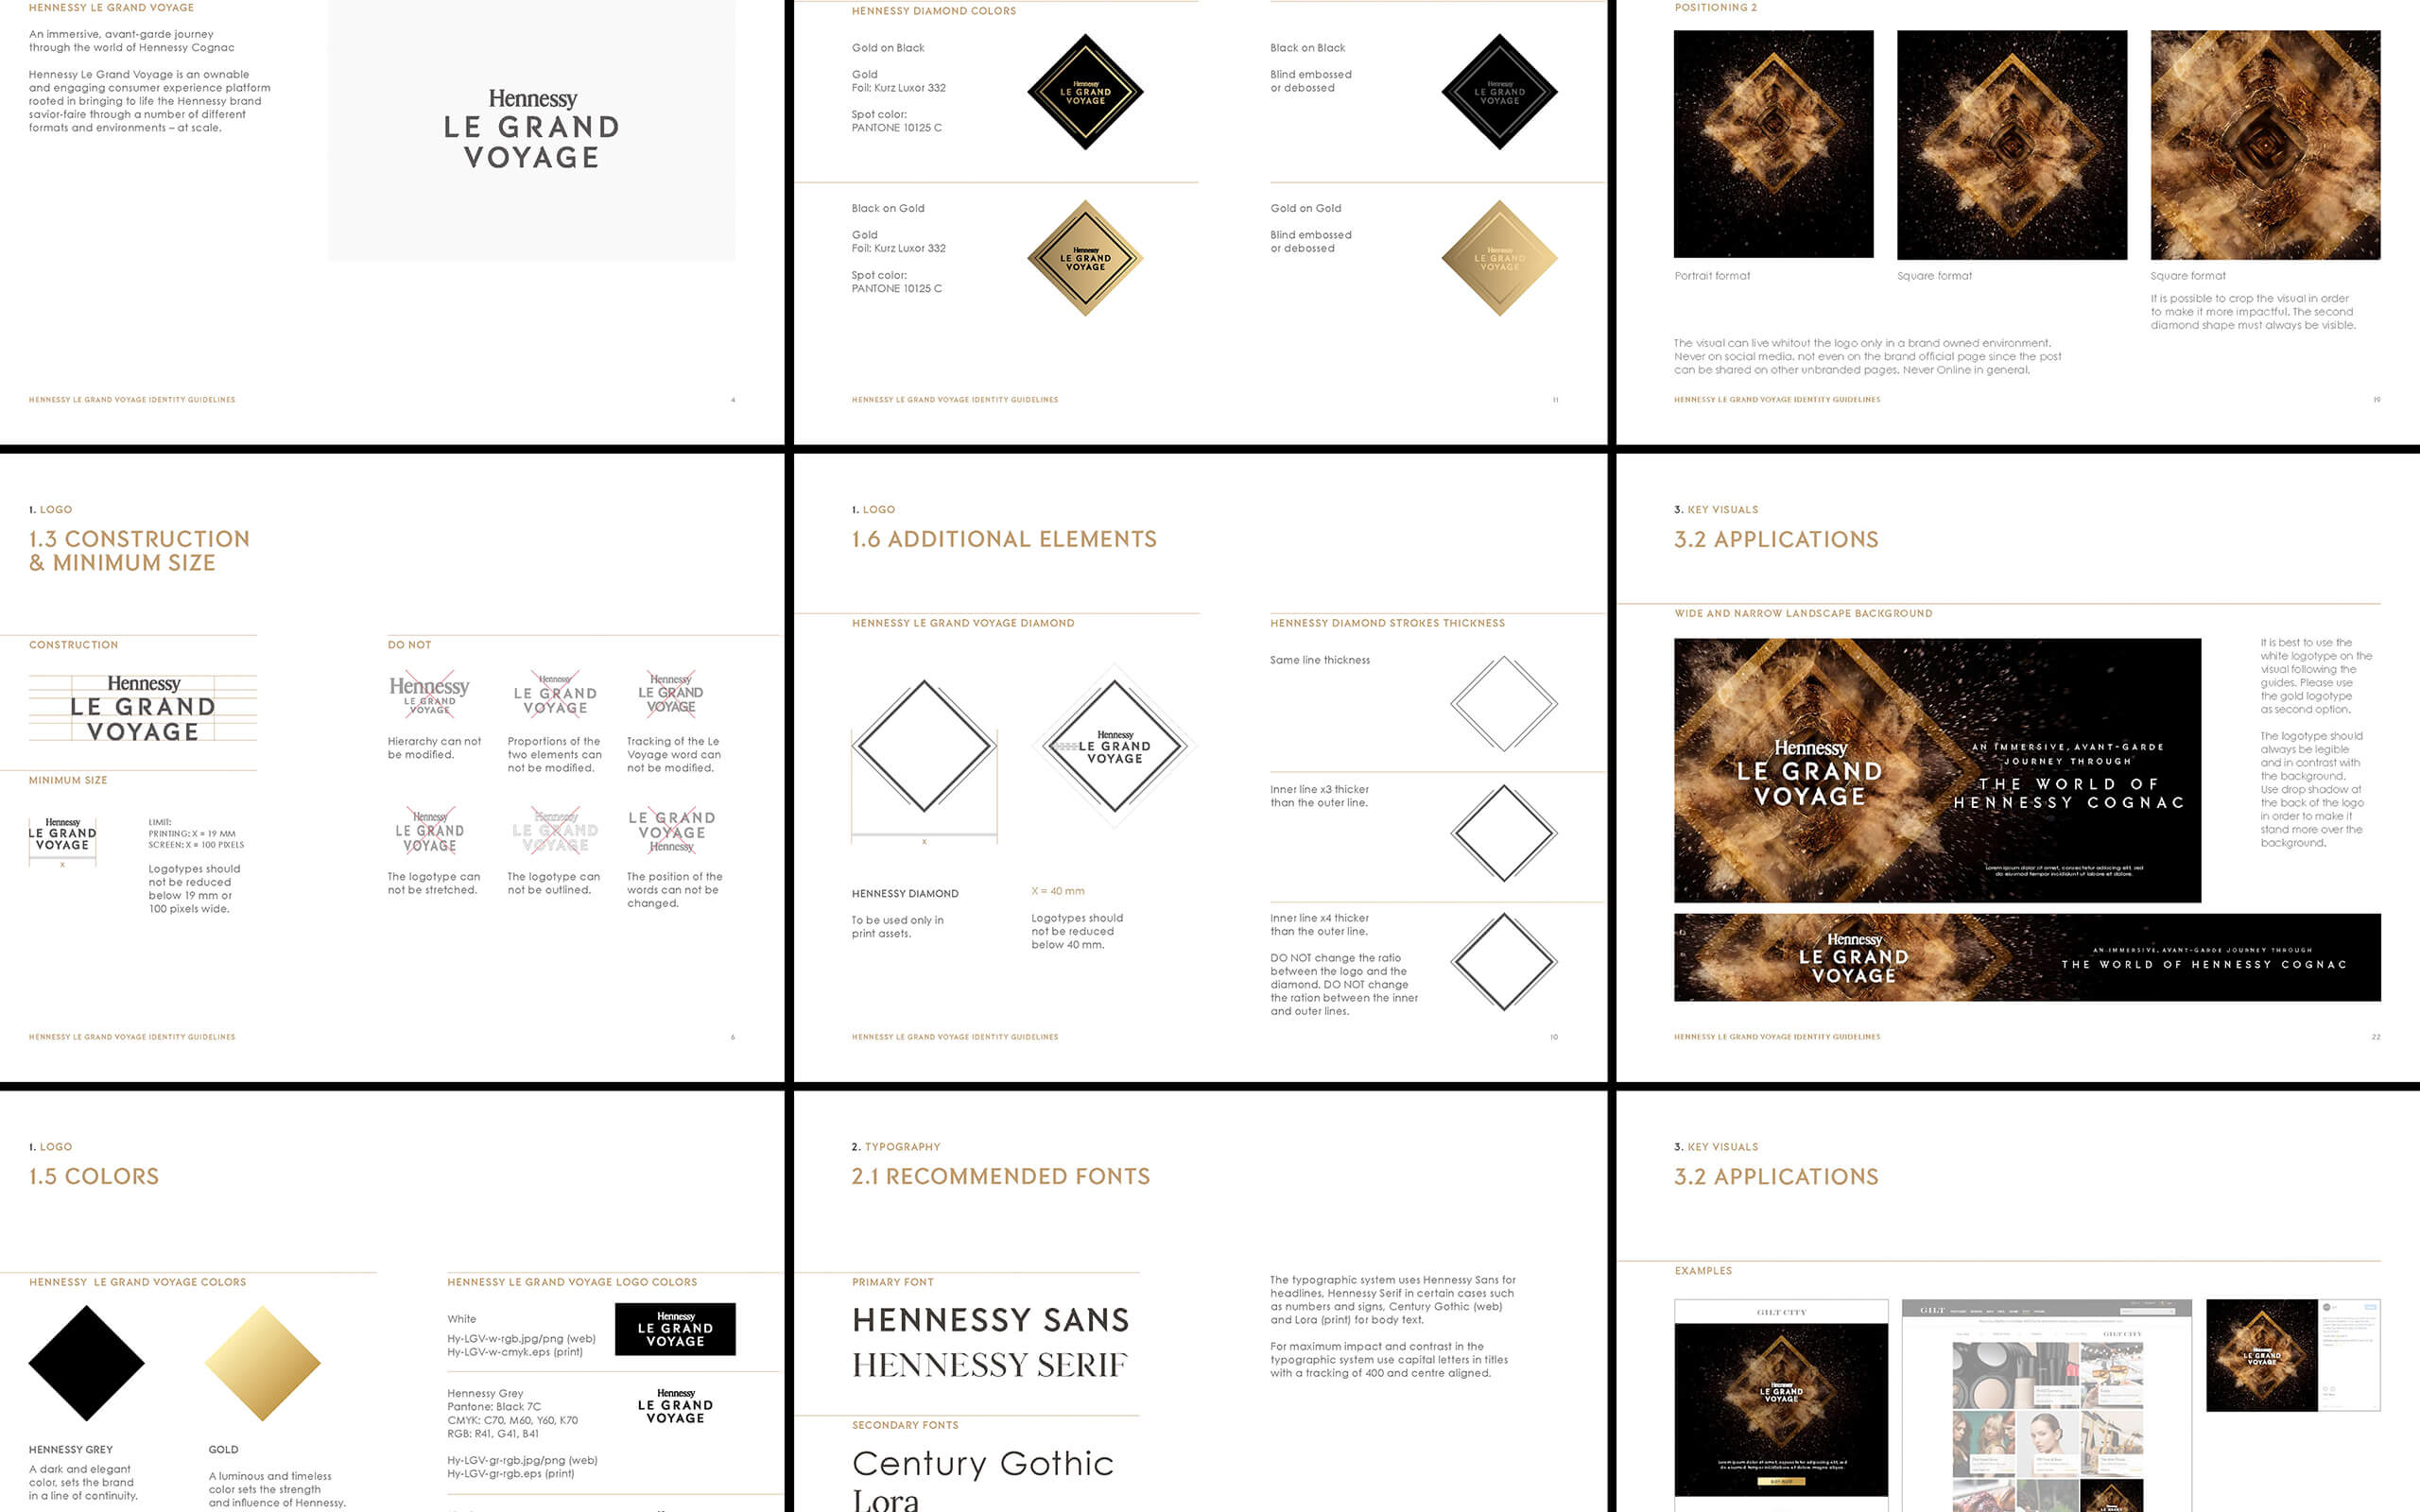 Hennessy brand guidelines